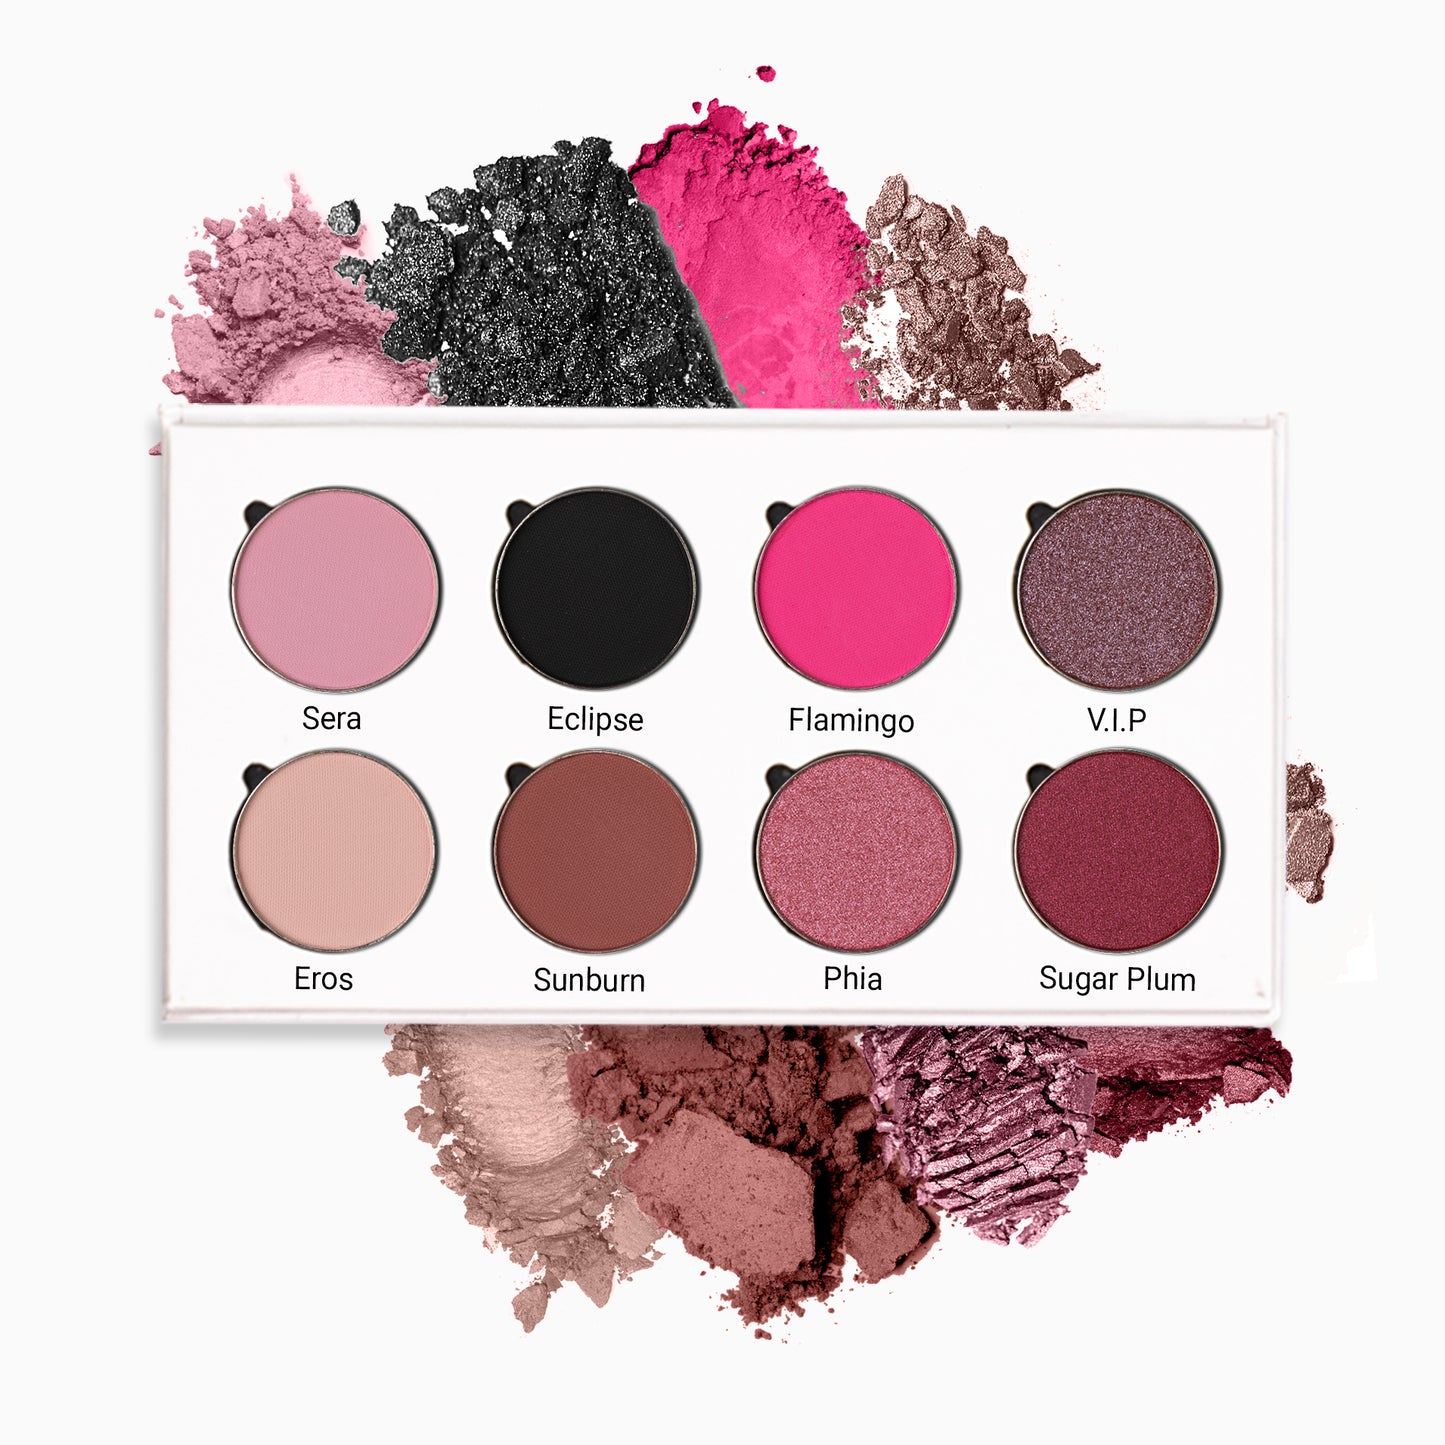 Less is More - 8 Eye Palette